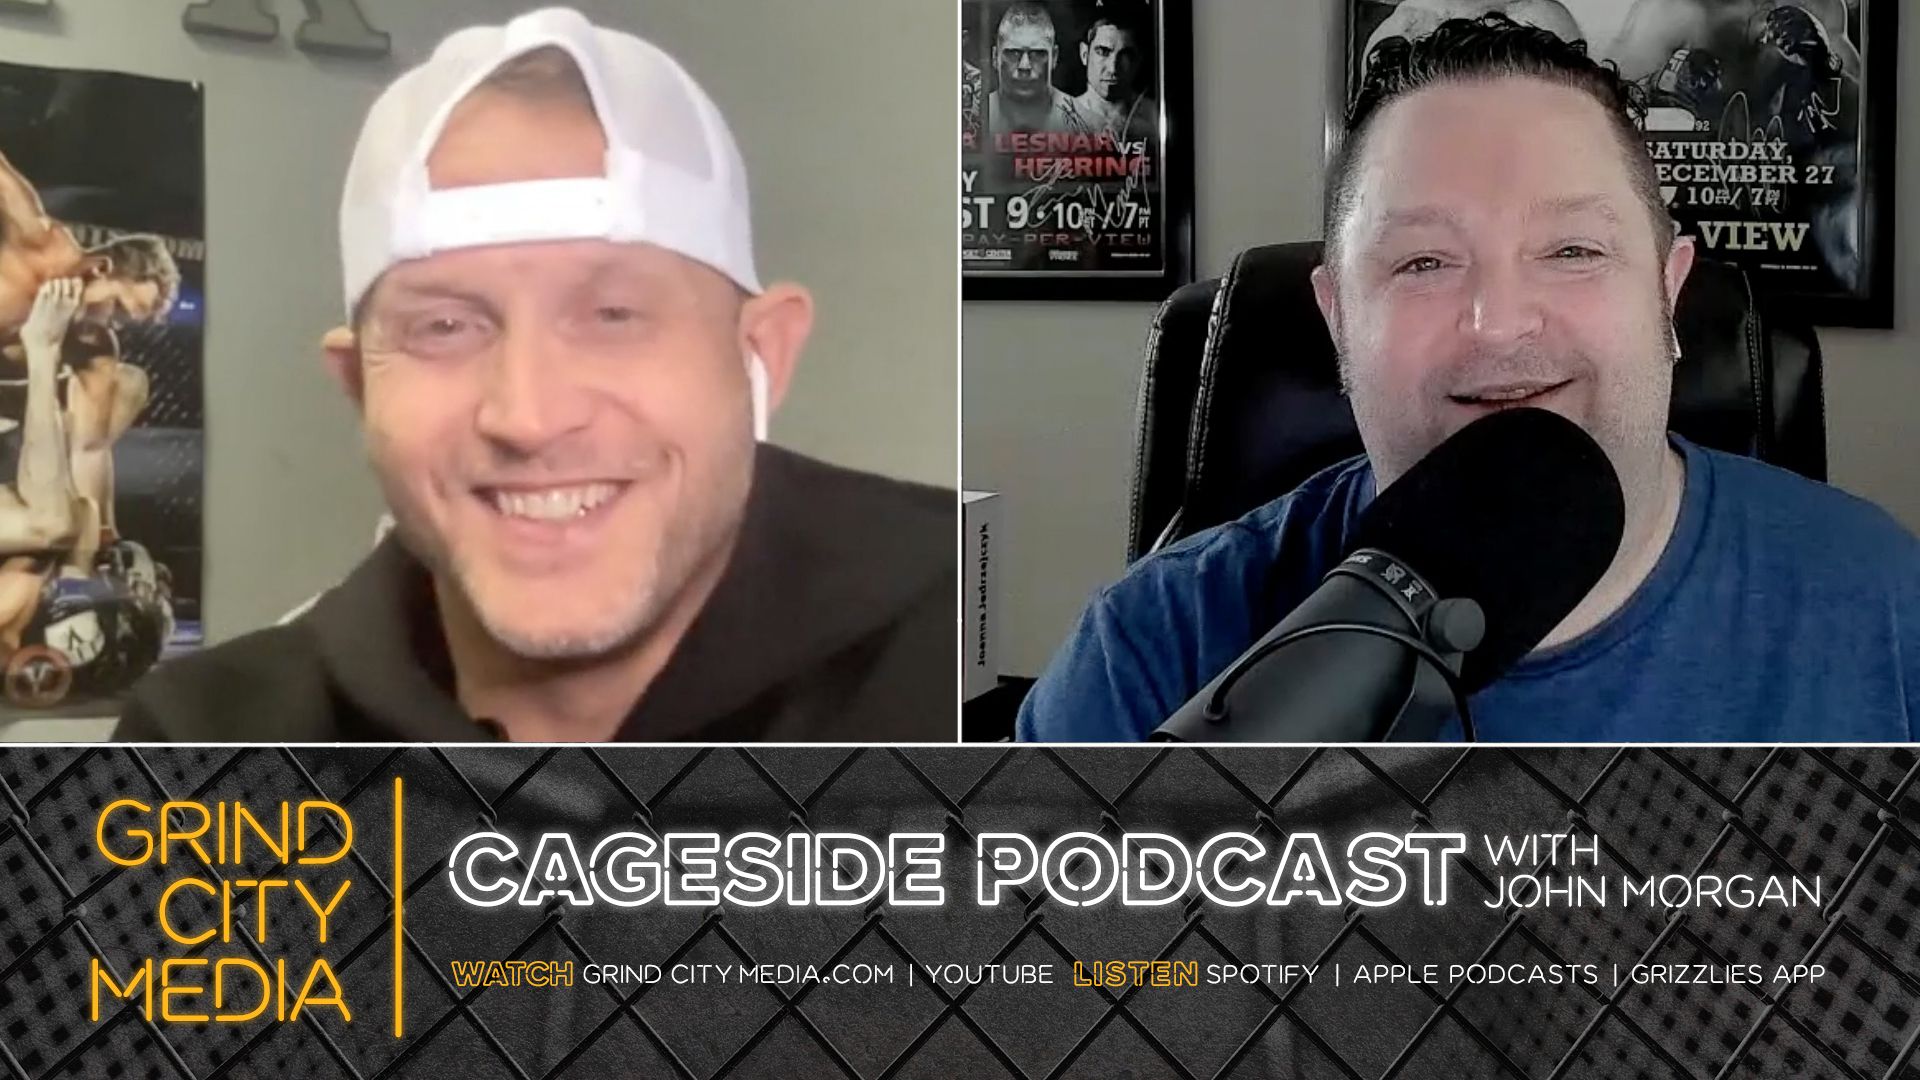 Cageside with John Morgan: Controversy